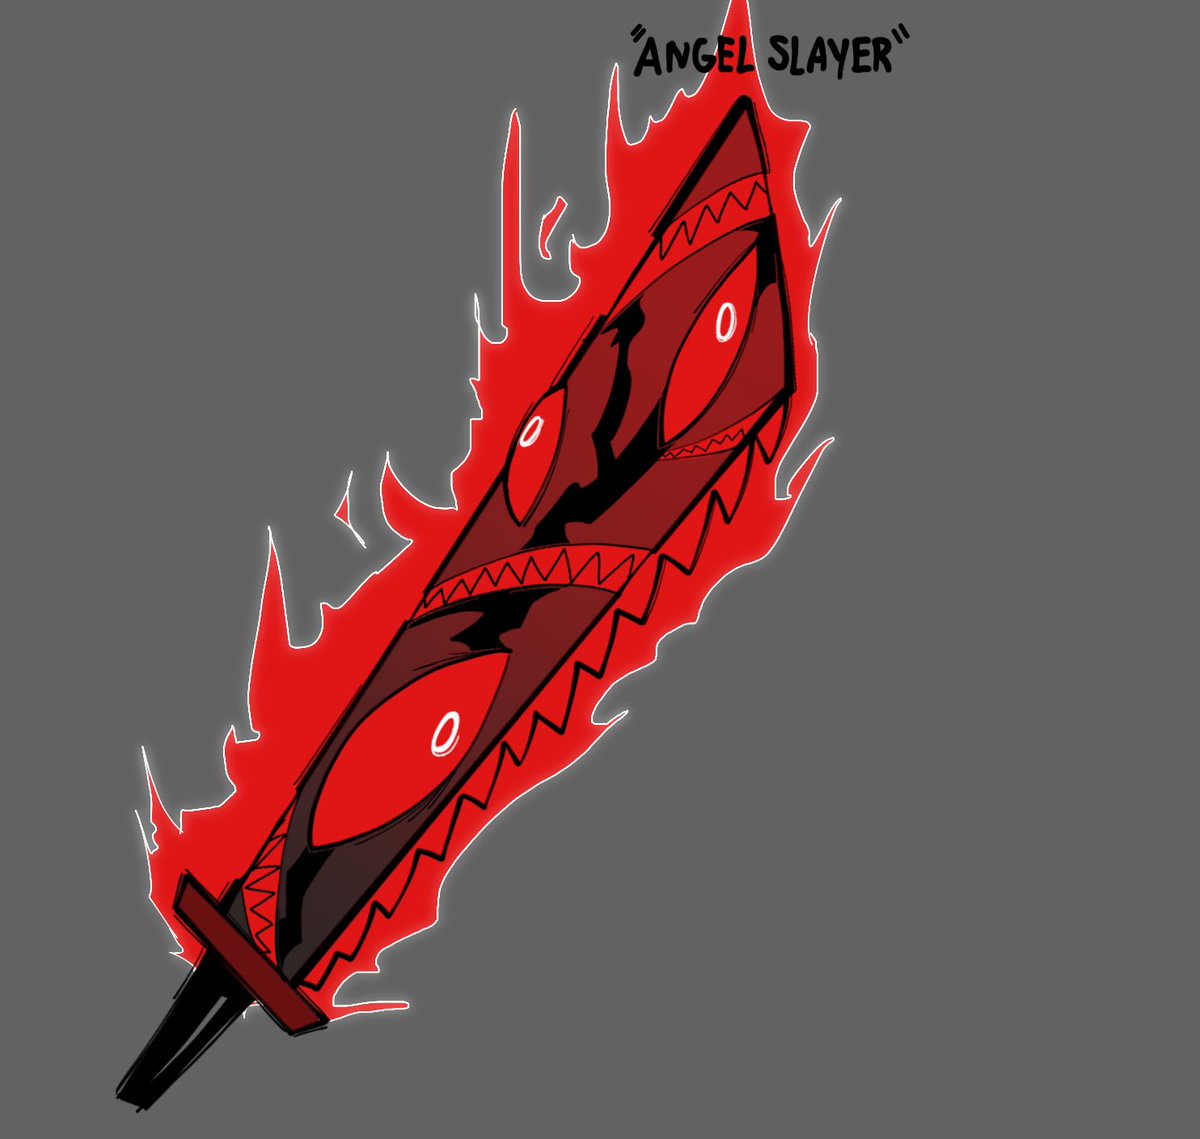 notes: Second sharpest weapon, though hell flames can surround the sword, allowing it to cut through anything, but he never really sets it aflame unless he’s in a tough spot.looking into the swords eyes reveals your worst fears and puts you in a trance, it has to be direct eye-